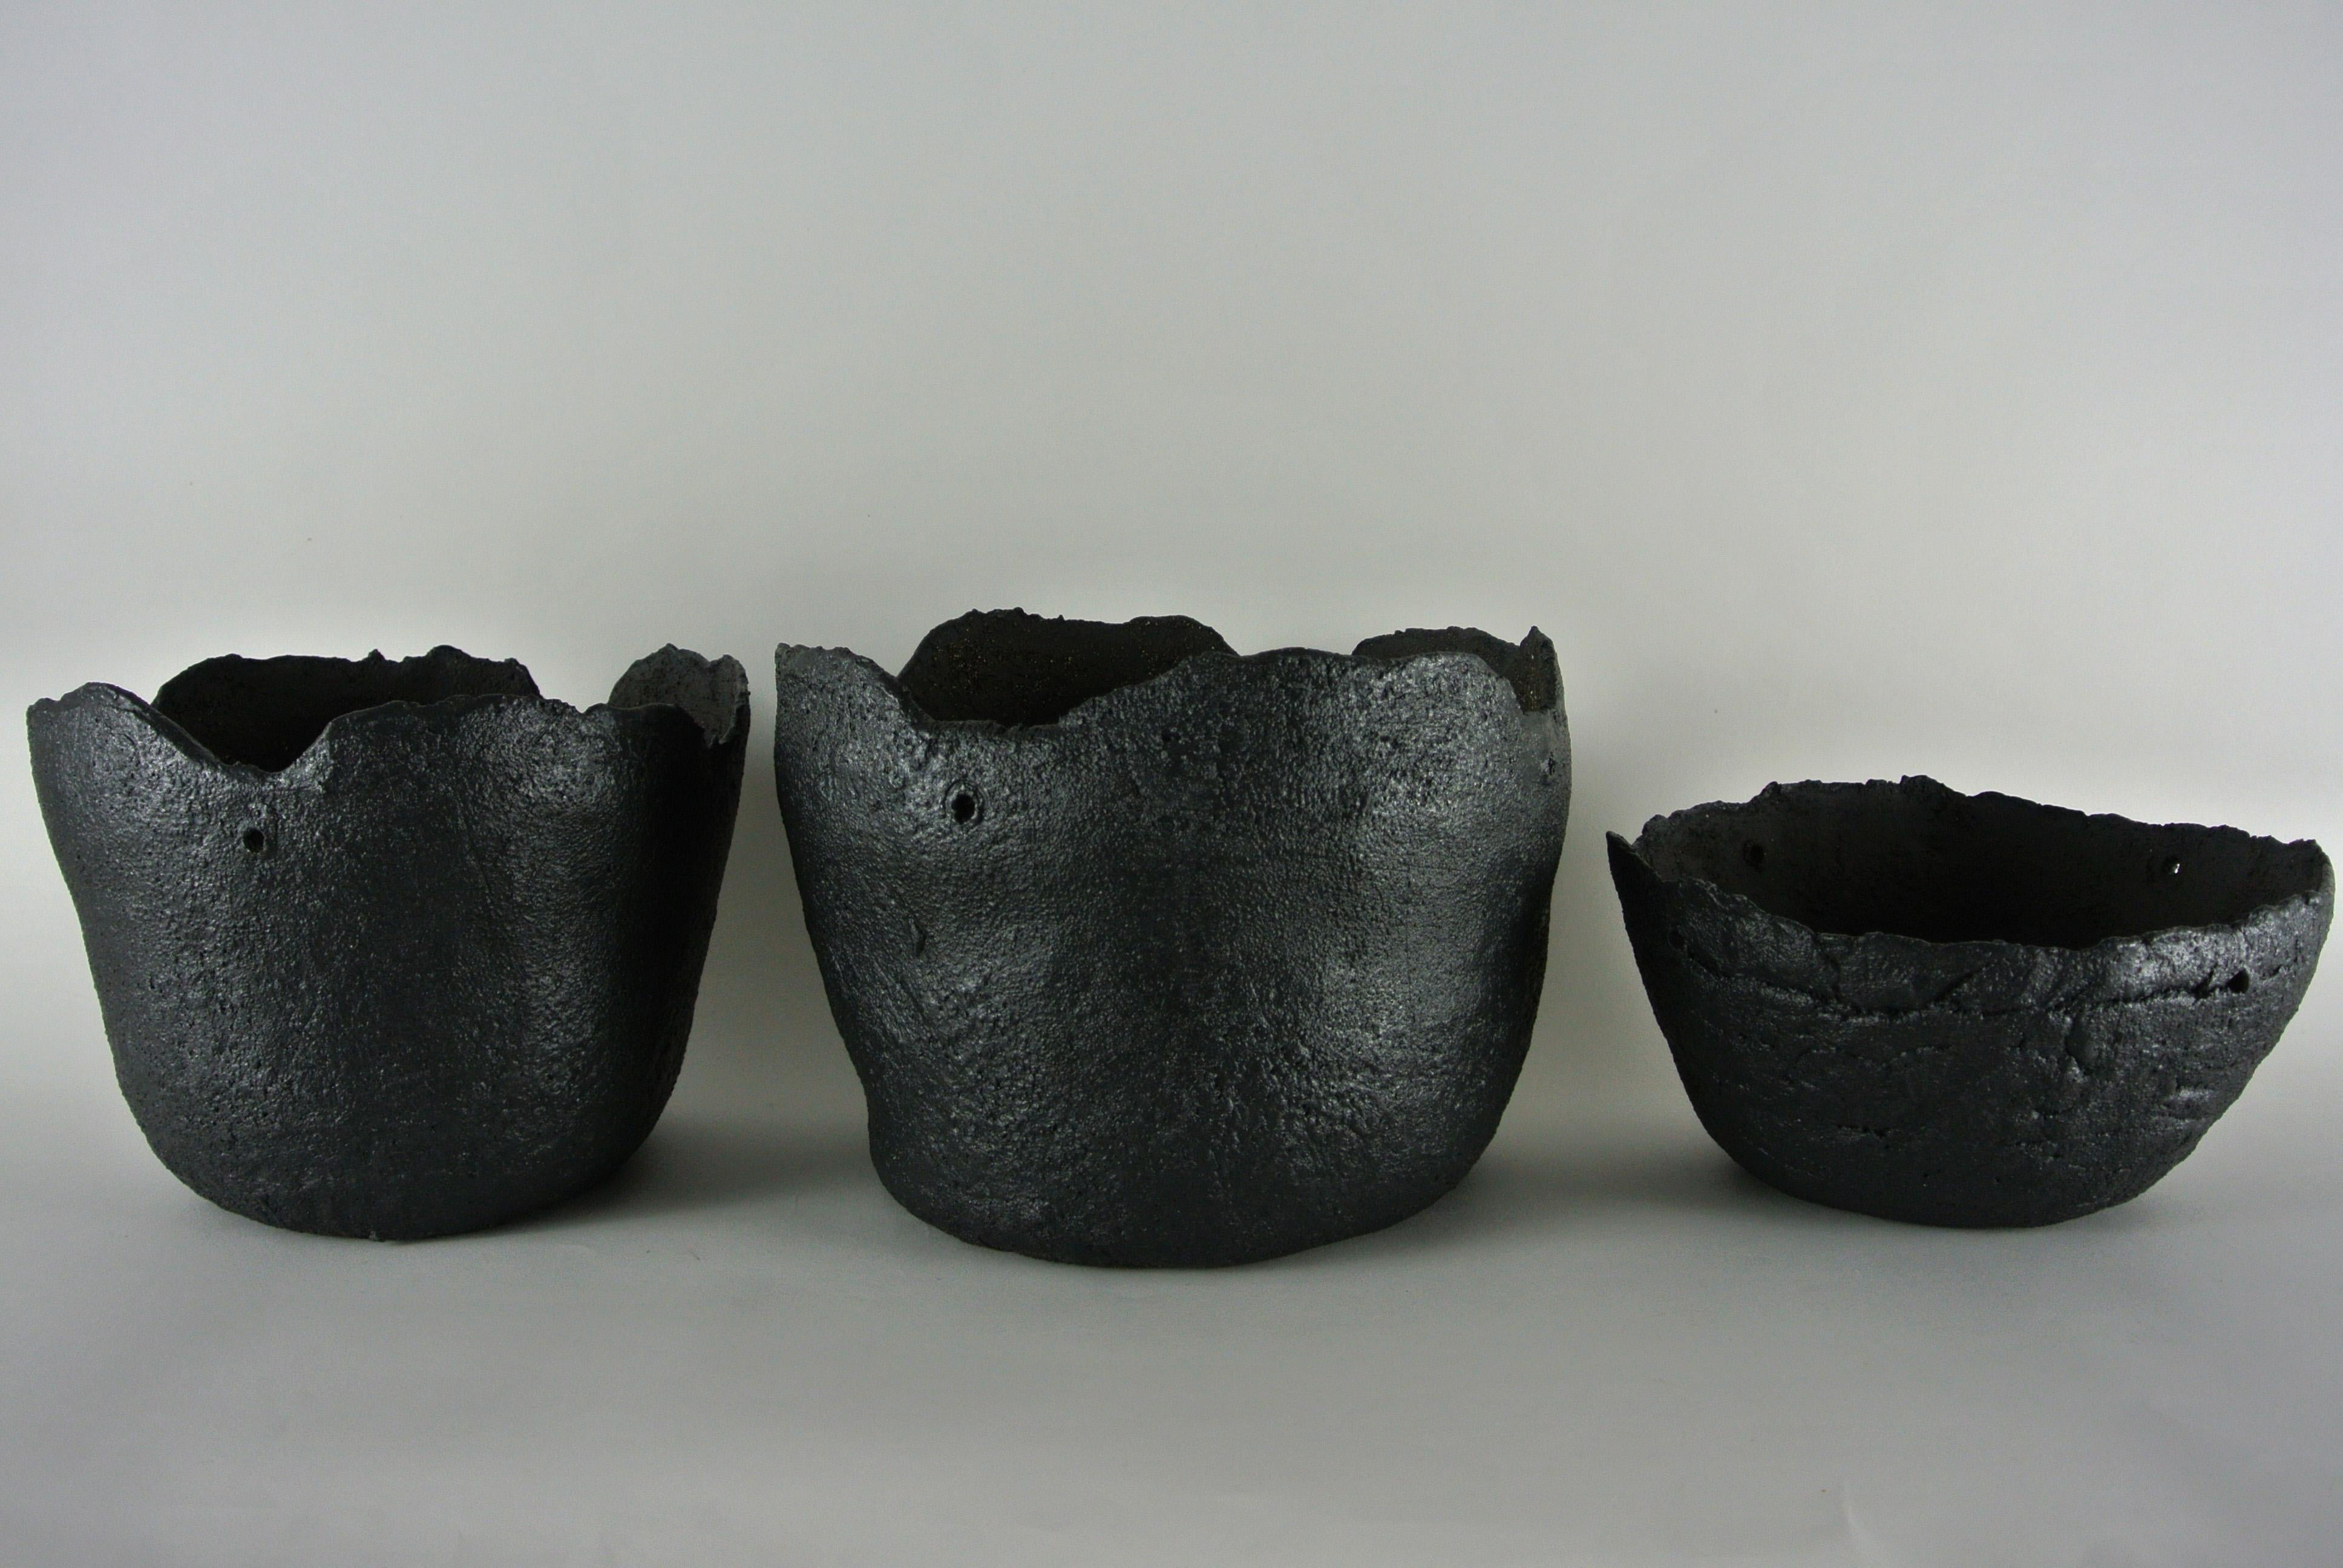 Asymmetric black stoneware planter with black metallic glaze. Unglazed on the inside and with holes along the top edge to hang from the ceiling.
Comes in a variety of shapes and sizes and material.